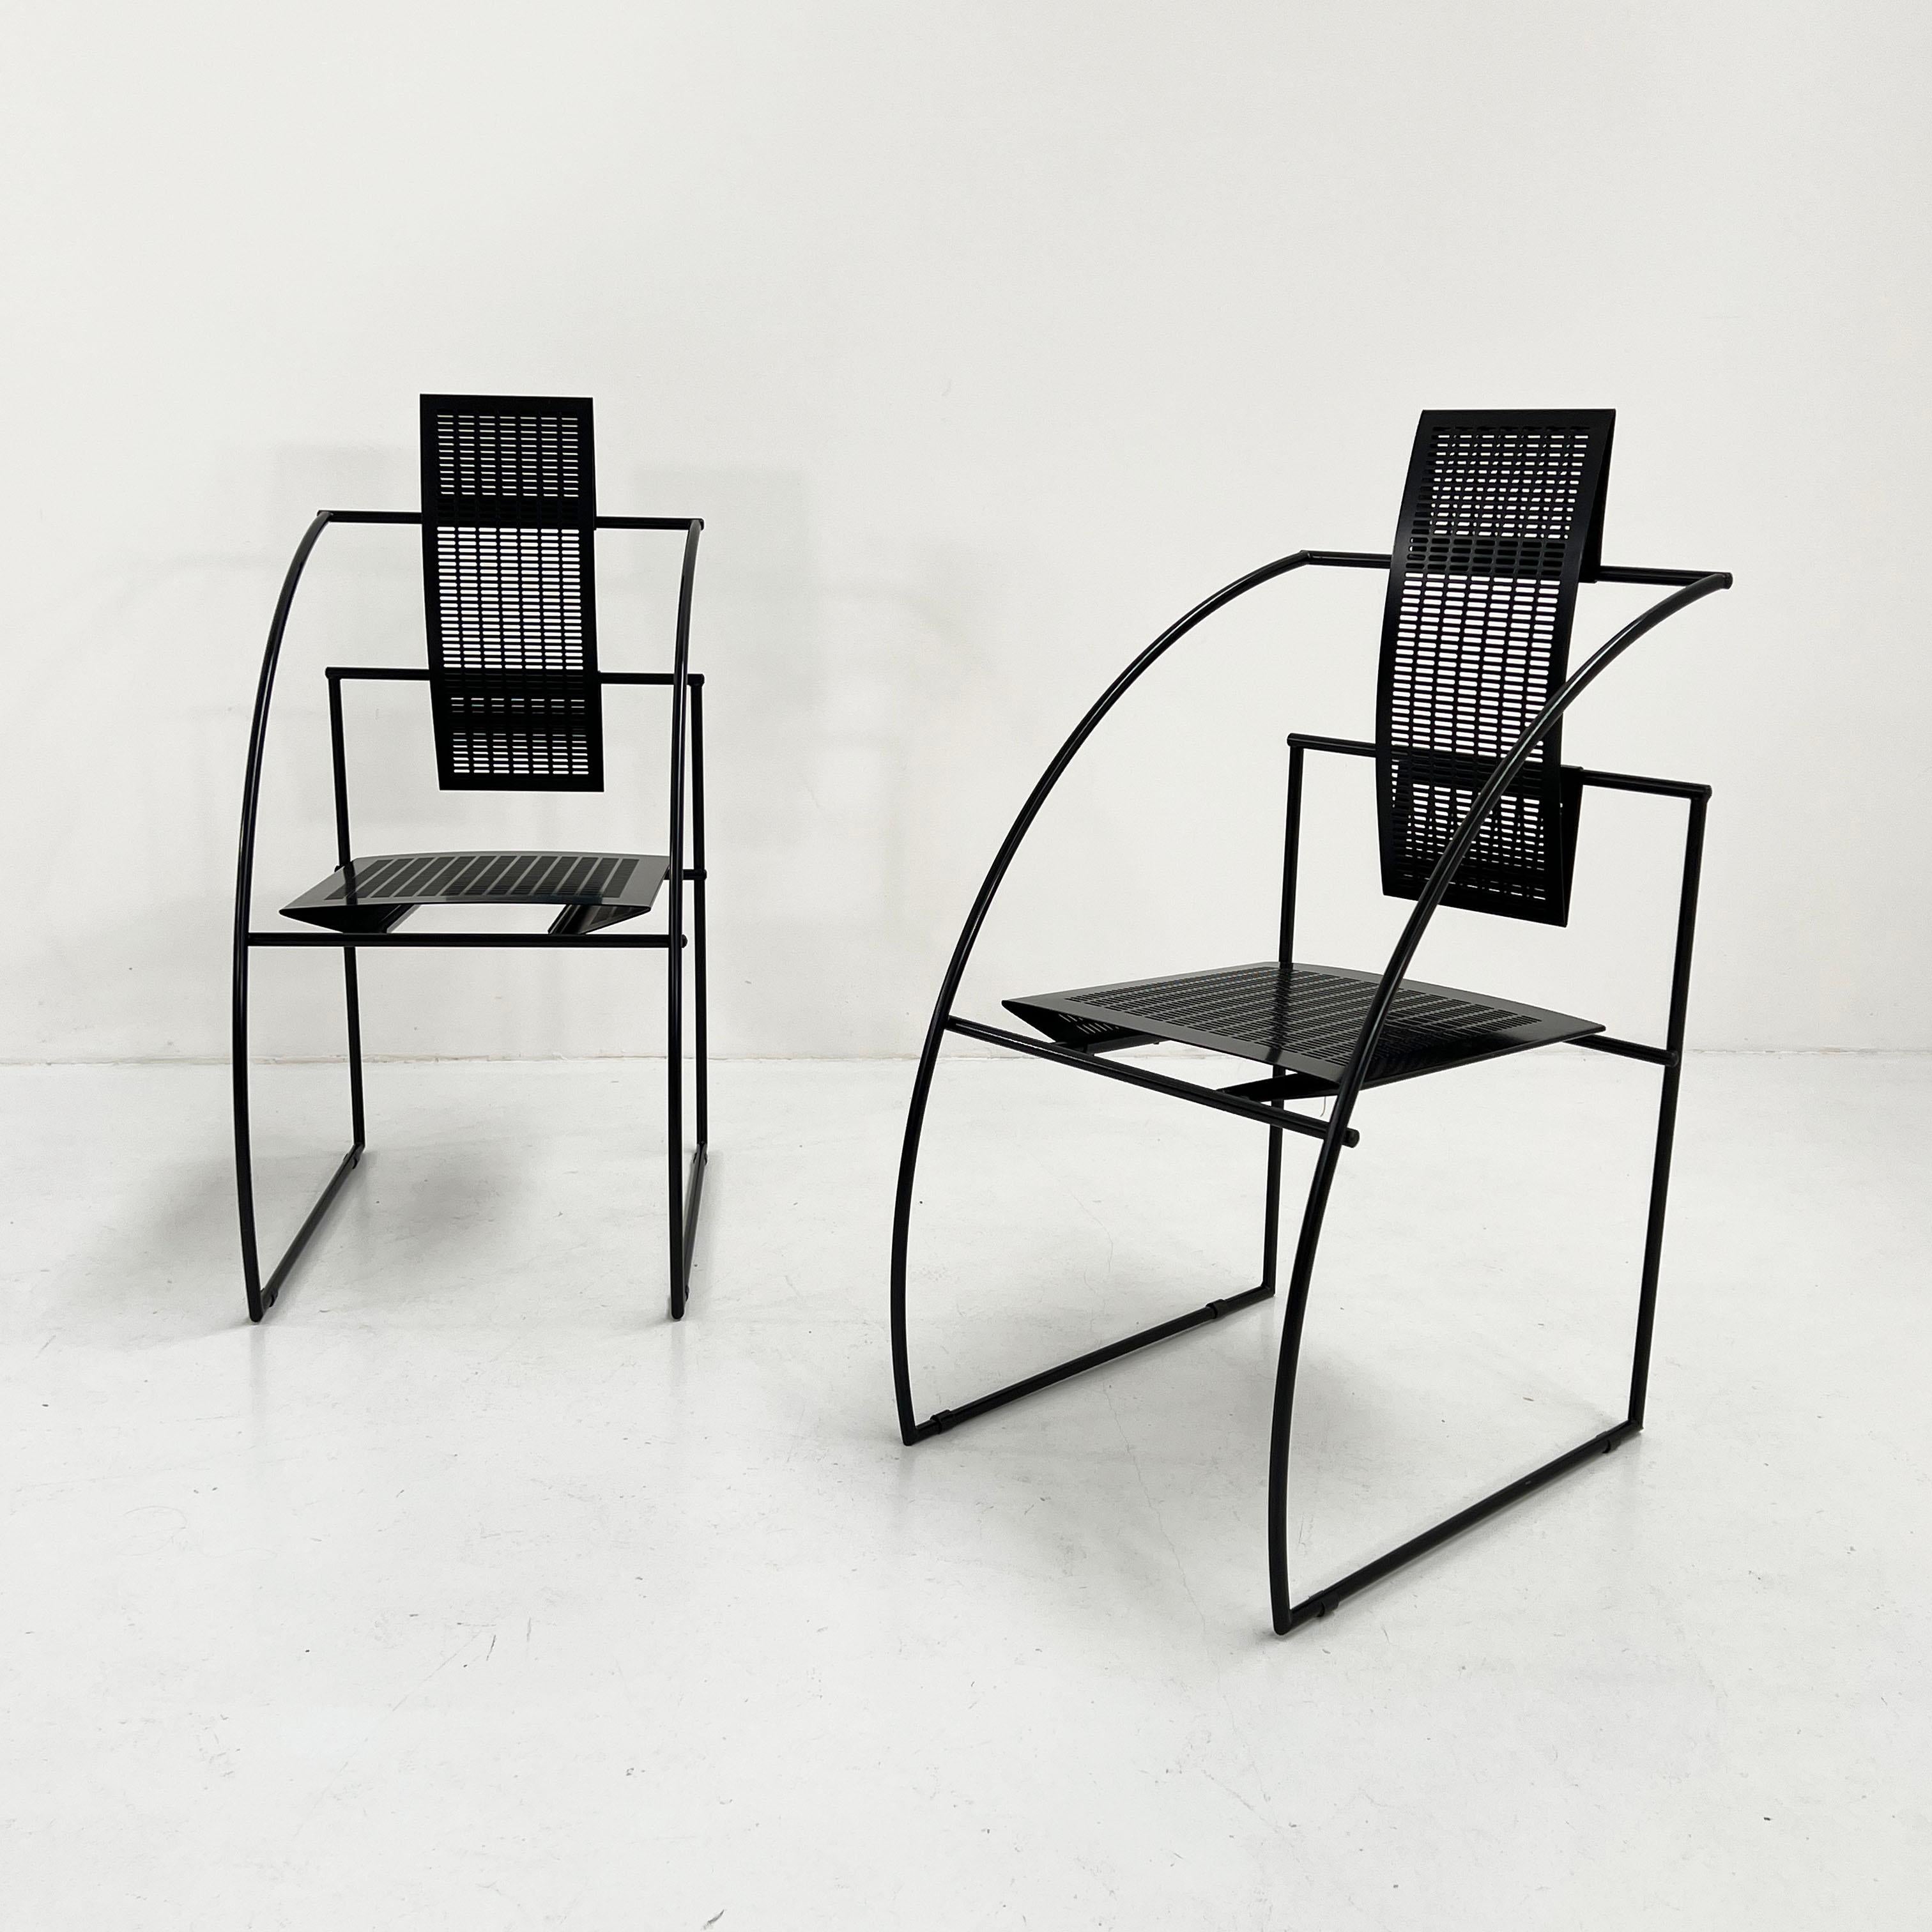 Quinta Chair by Mario Botta for Alias, 1980s For Sale 2